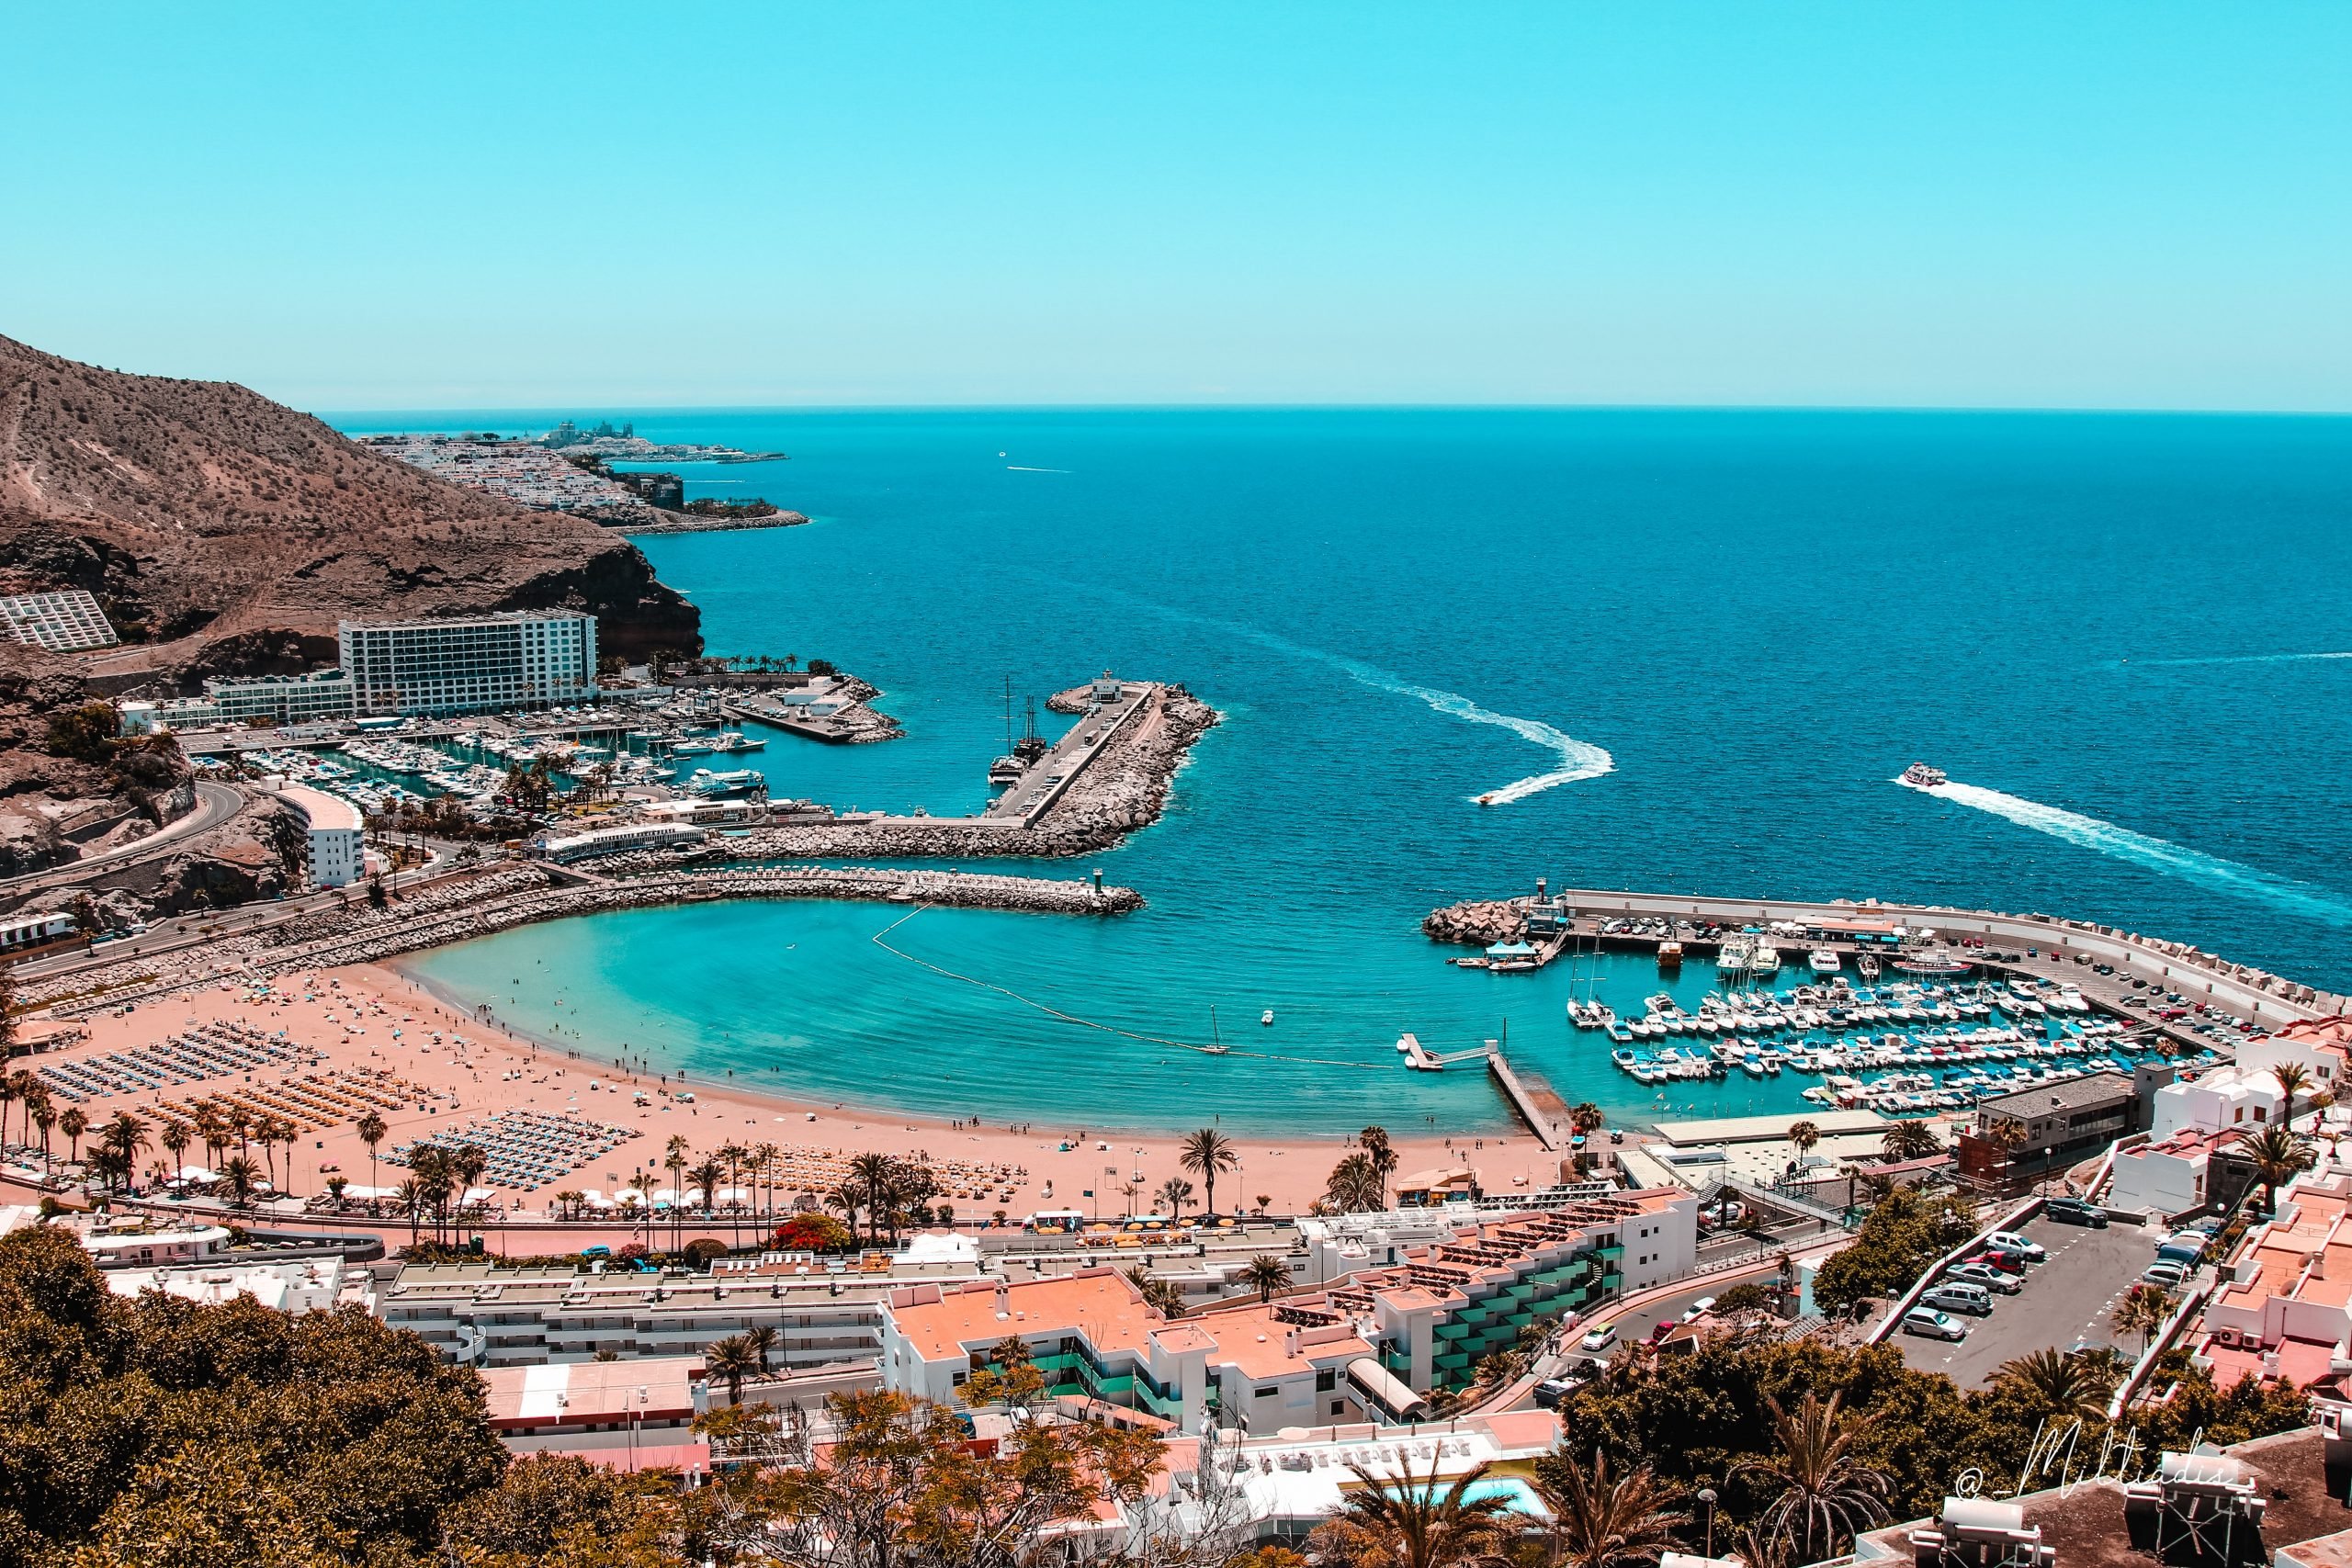 How To Get From Gran Canaria Airport To City Center - All Possible Ways, How To Get From Gran Canaria Airport To Las Palmas - All Possible Ways, cheapest way from Gran Canaria airport to Las Palmas, Gran Canaria airport to Las Palmas, Gran Canaria airport to Las Palmas, Gran Canaria Bus Airport, bus from Gran Canaria airport to Las Palmas, taxi Gran Canaria airport to Las Palmas, Uber Gran Canaria airport to Las Palmas, Gran Canaria airport to Las Palmas by bus, Gran Canaria to Las Palmas, Las Palmas airport to Las Palmas, GRAN CANARIA AIRPORT TO LAS PALMAS
